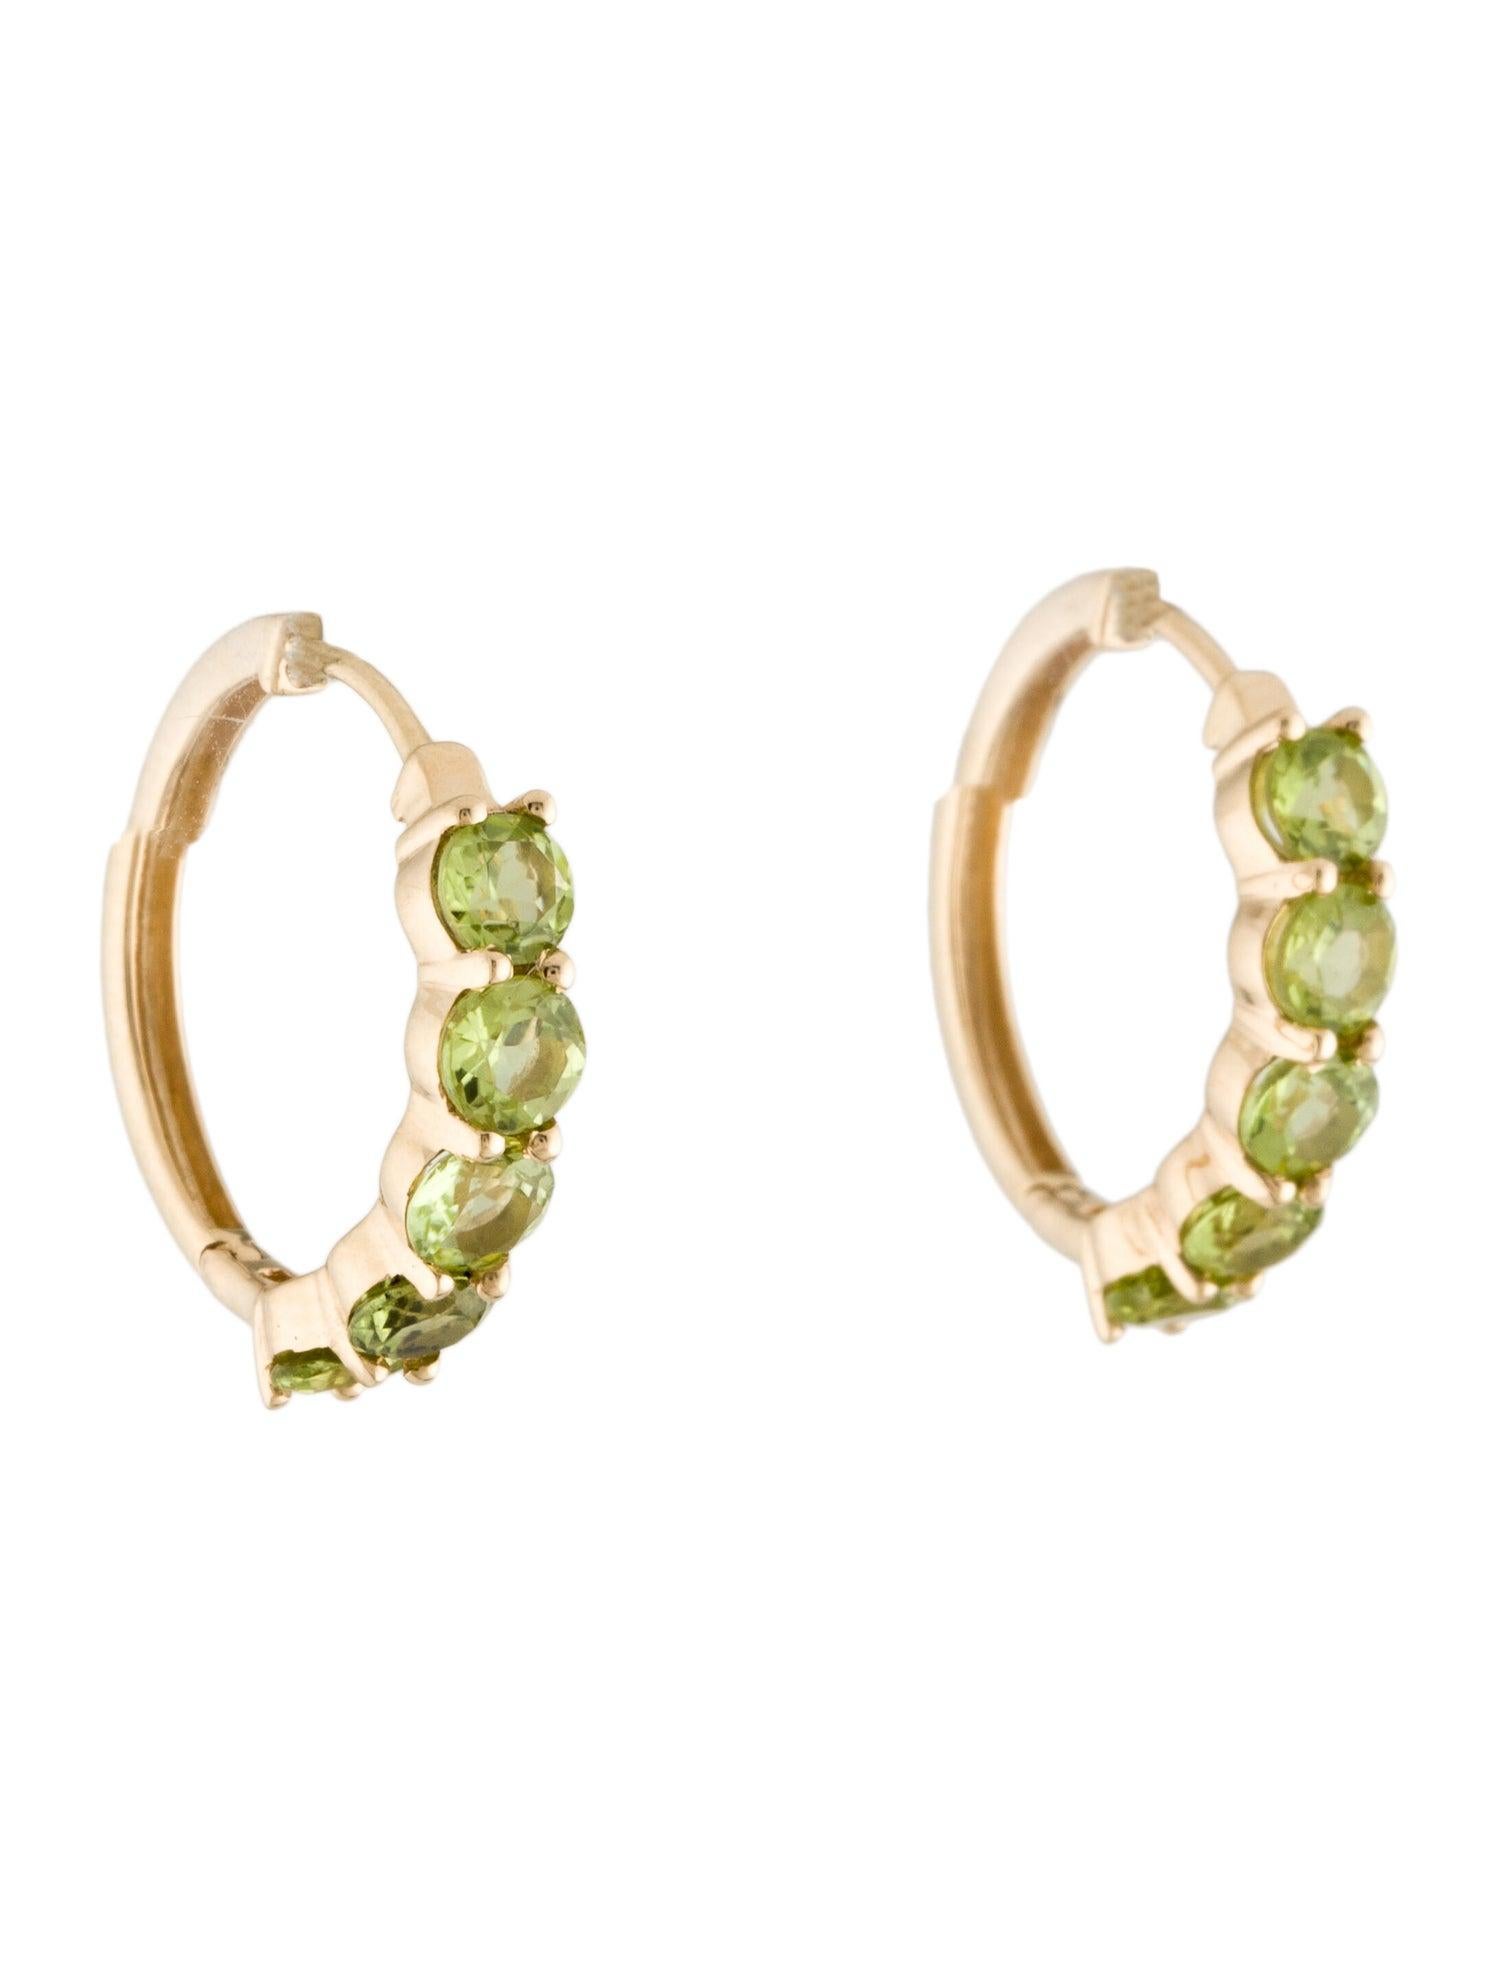 14K Peridot Hoop Earrings - 2.20ctw, Elegant Gemstone Jewelry, Timeless Style In New Condition For Sale In Holtsville, NY